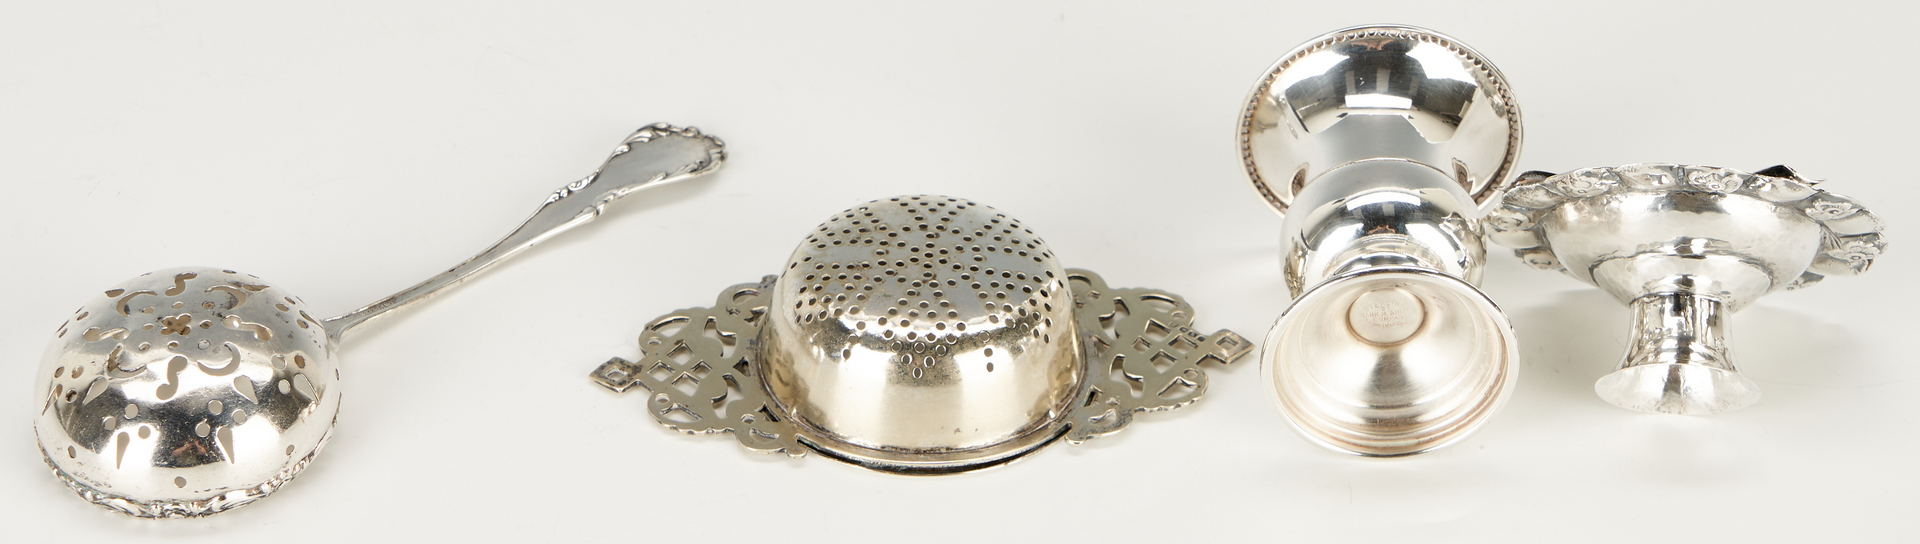 Lot 1171: 20 Pcs. Assorted Silver Items, Sterling & Silverplate Items